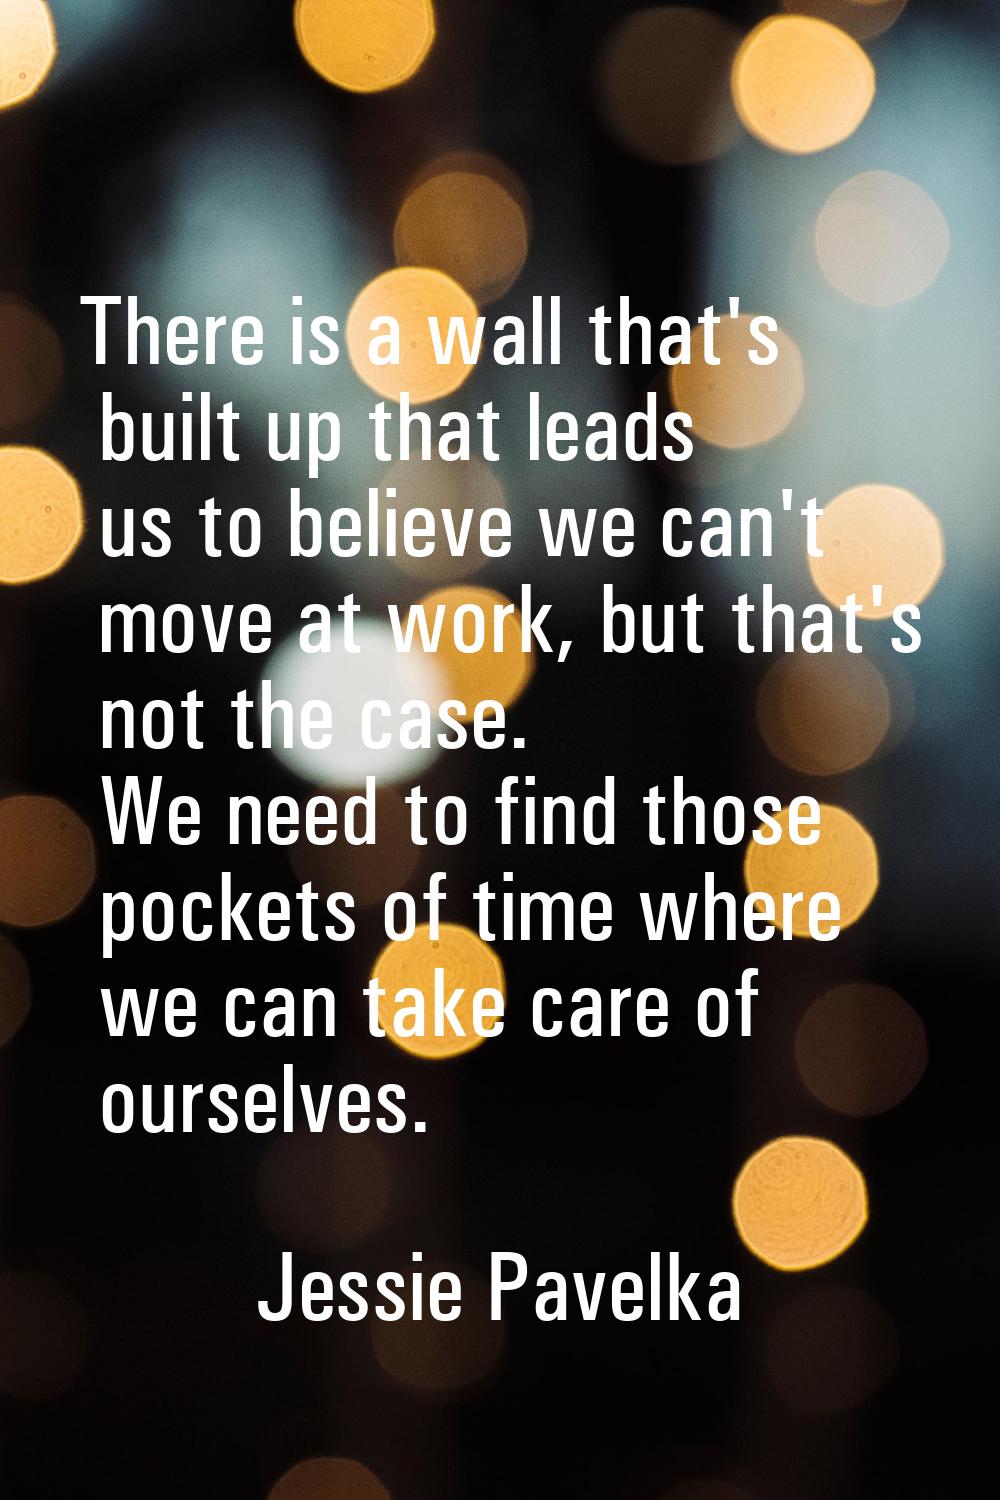 There is a wall that's built up that leads us to believe we can't move at work, but that's not the 